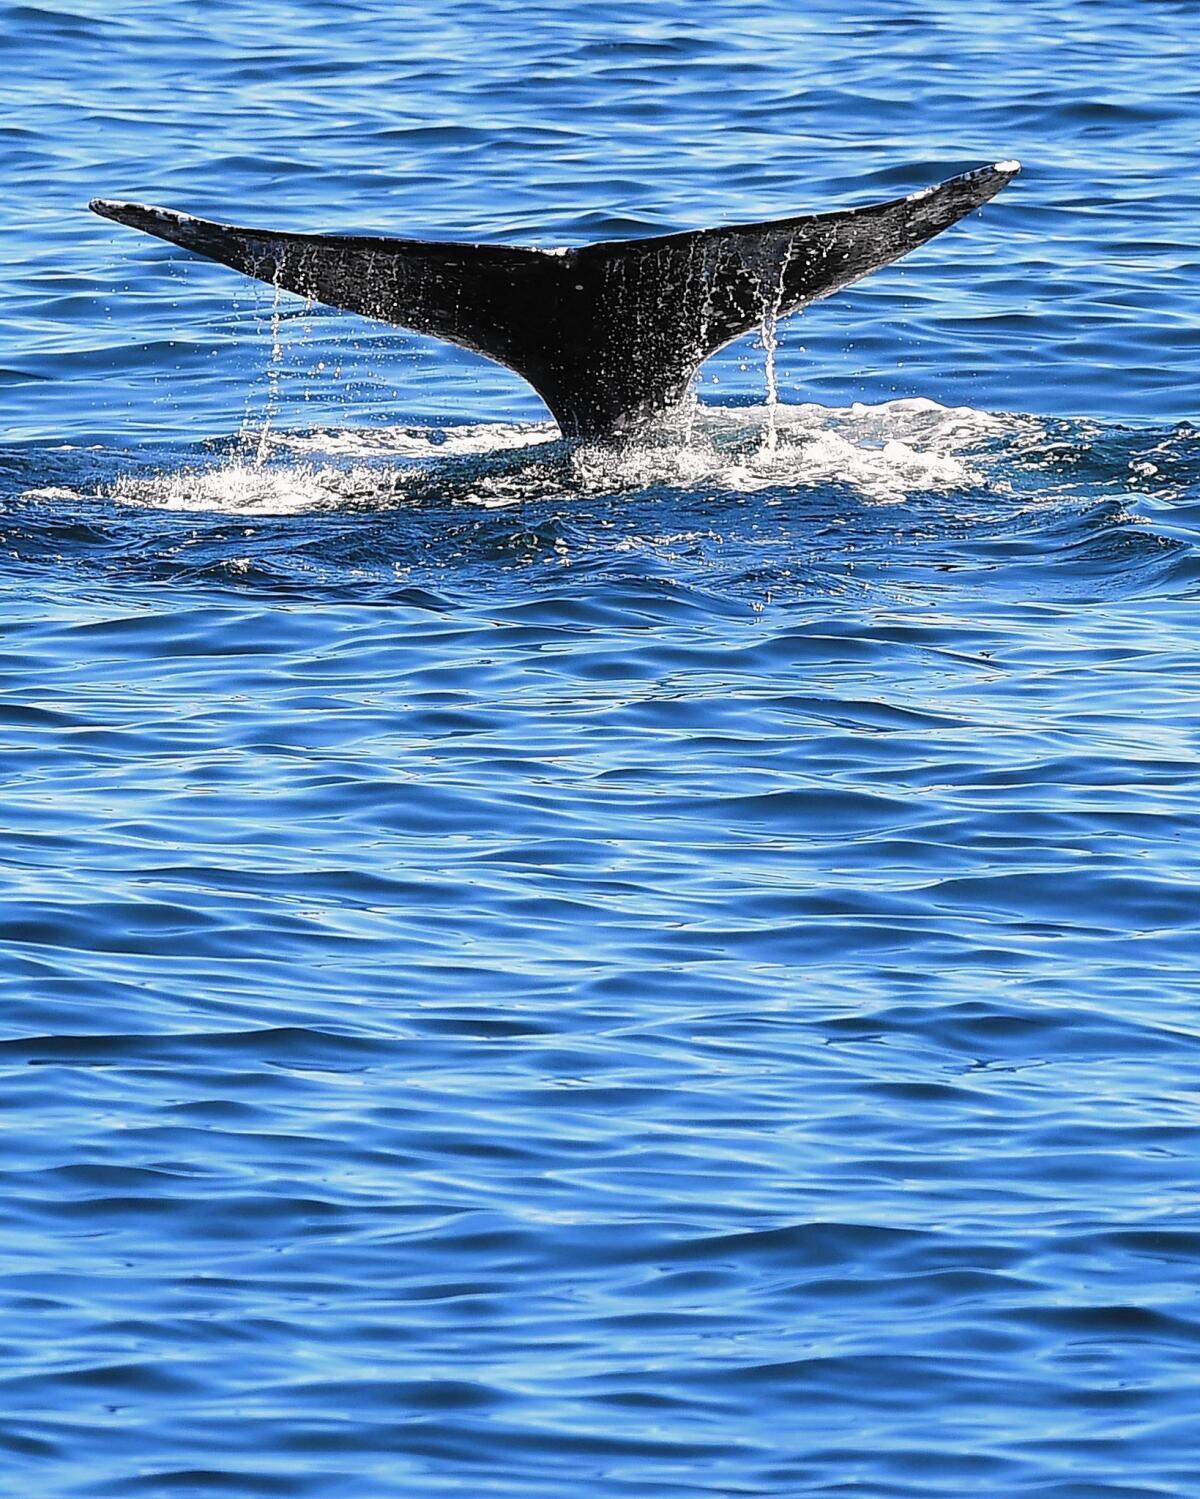 The tail of a gray whale emerges as the mammal makes its descent into the Pacific Ocean off the Southern California coast on Jan. 12 during the whales' annual migration.